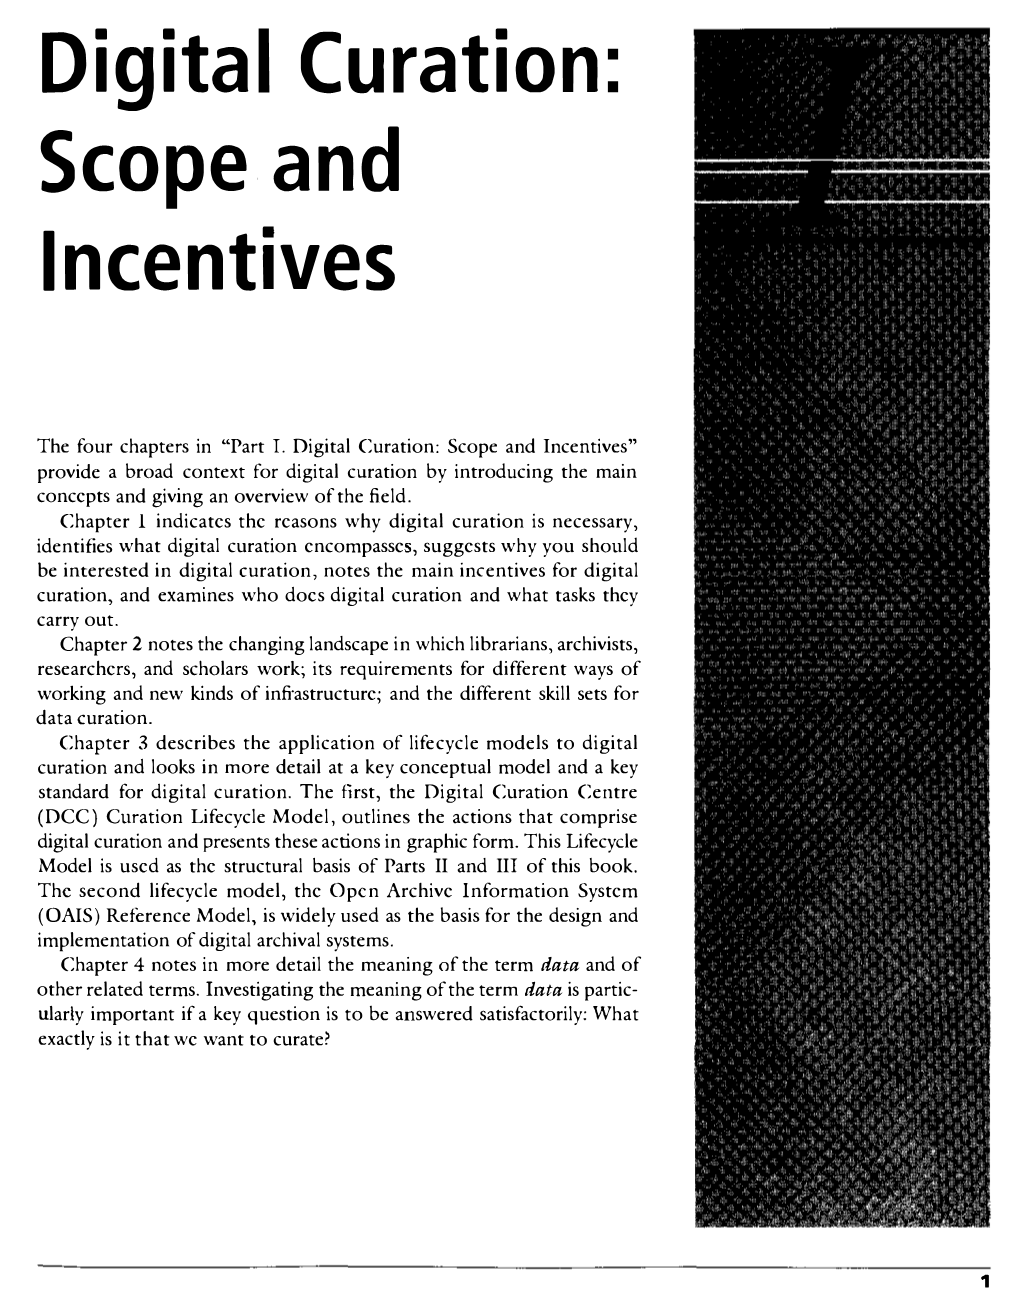 Digital Curation: Scope and Incentives" Provide a Broad Context Fo R Digital Curation by Introducing the Main Concepts and Giving an Overview of the Field